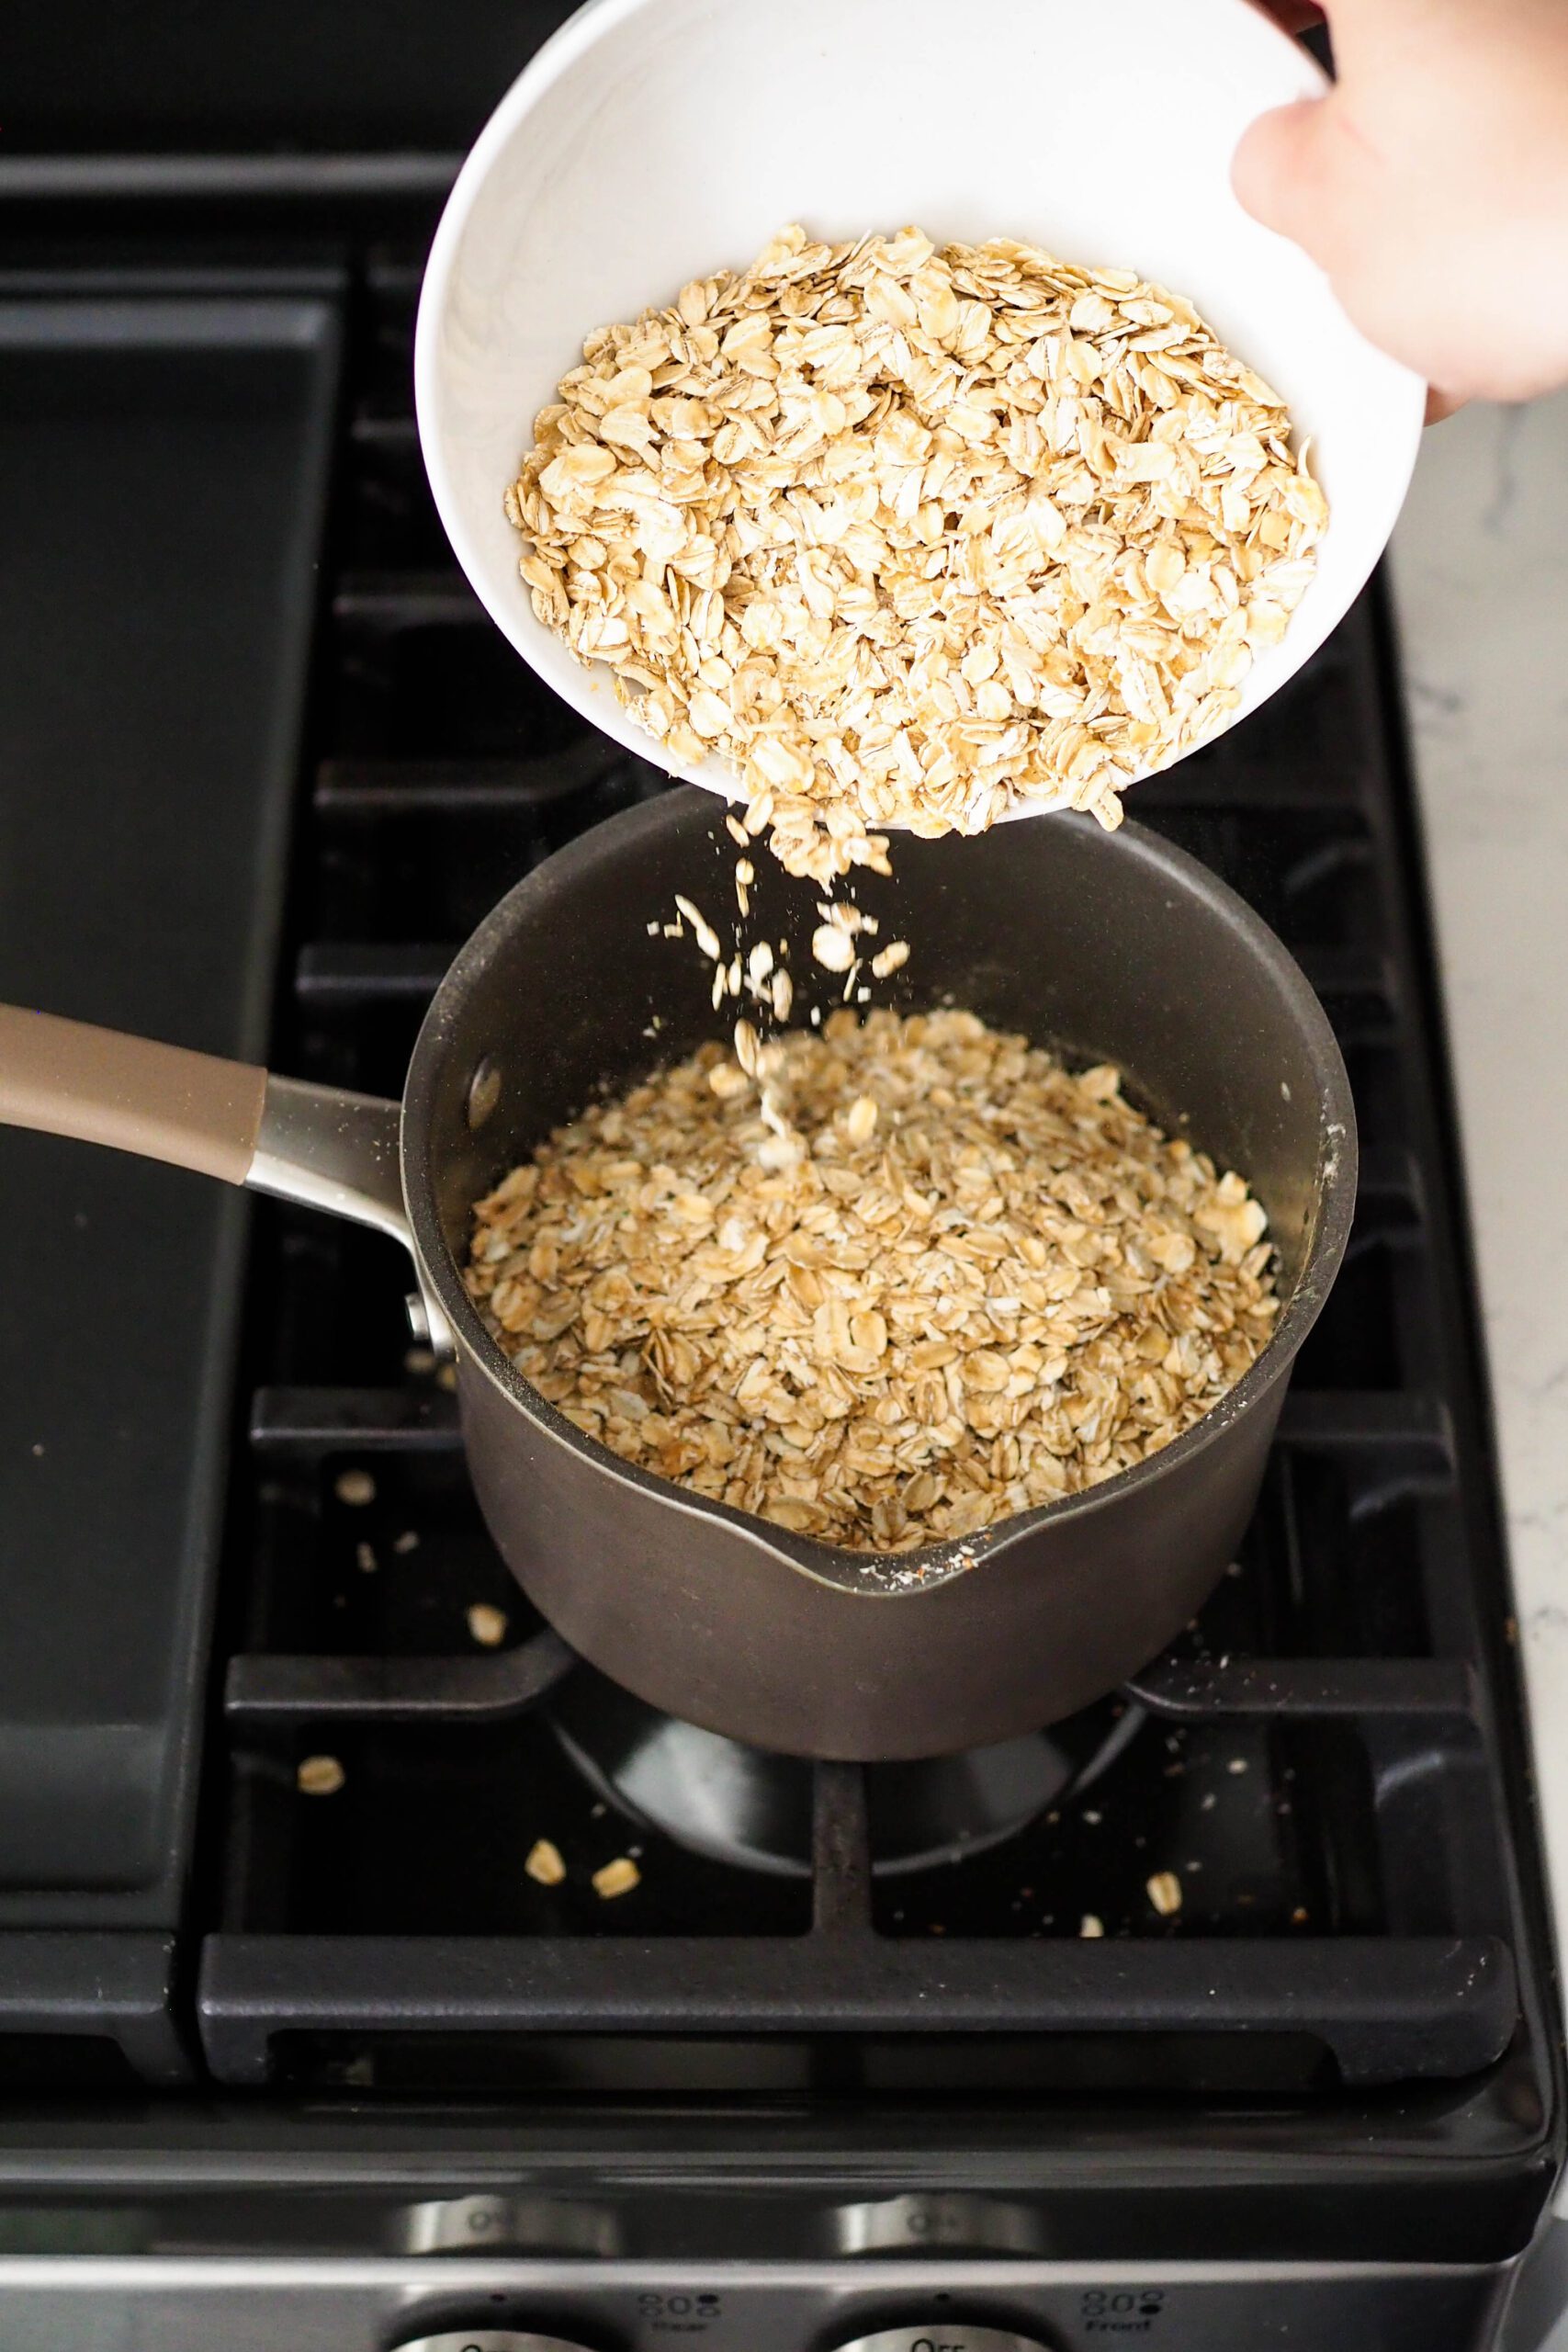 Rolled oats are poured into a medium pot over the stove.